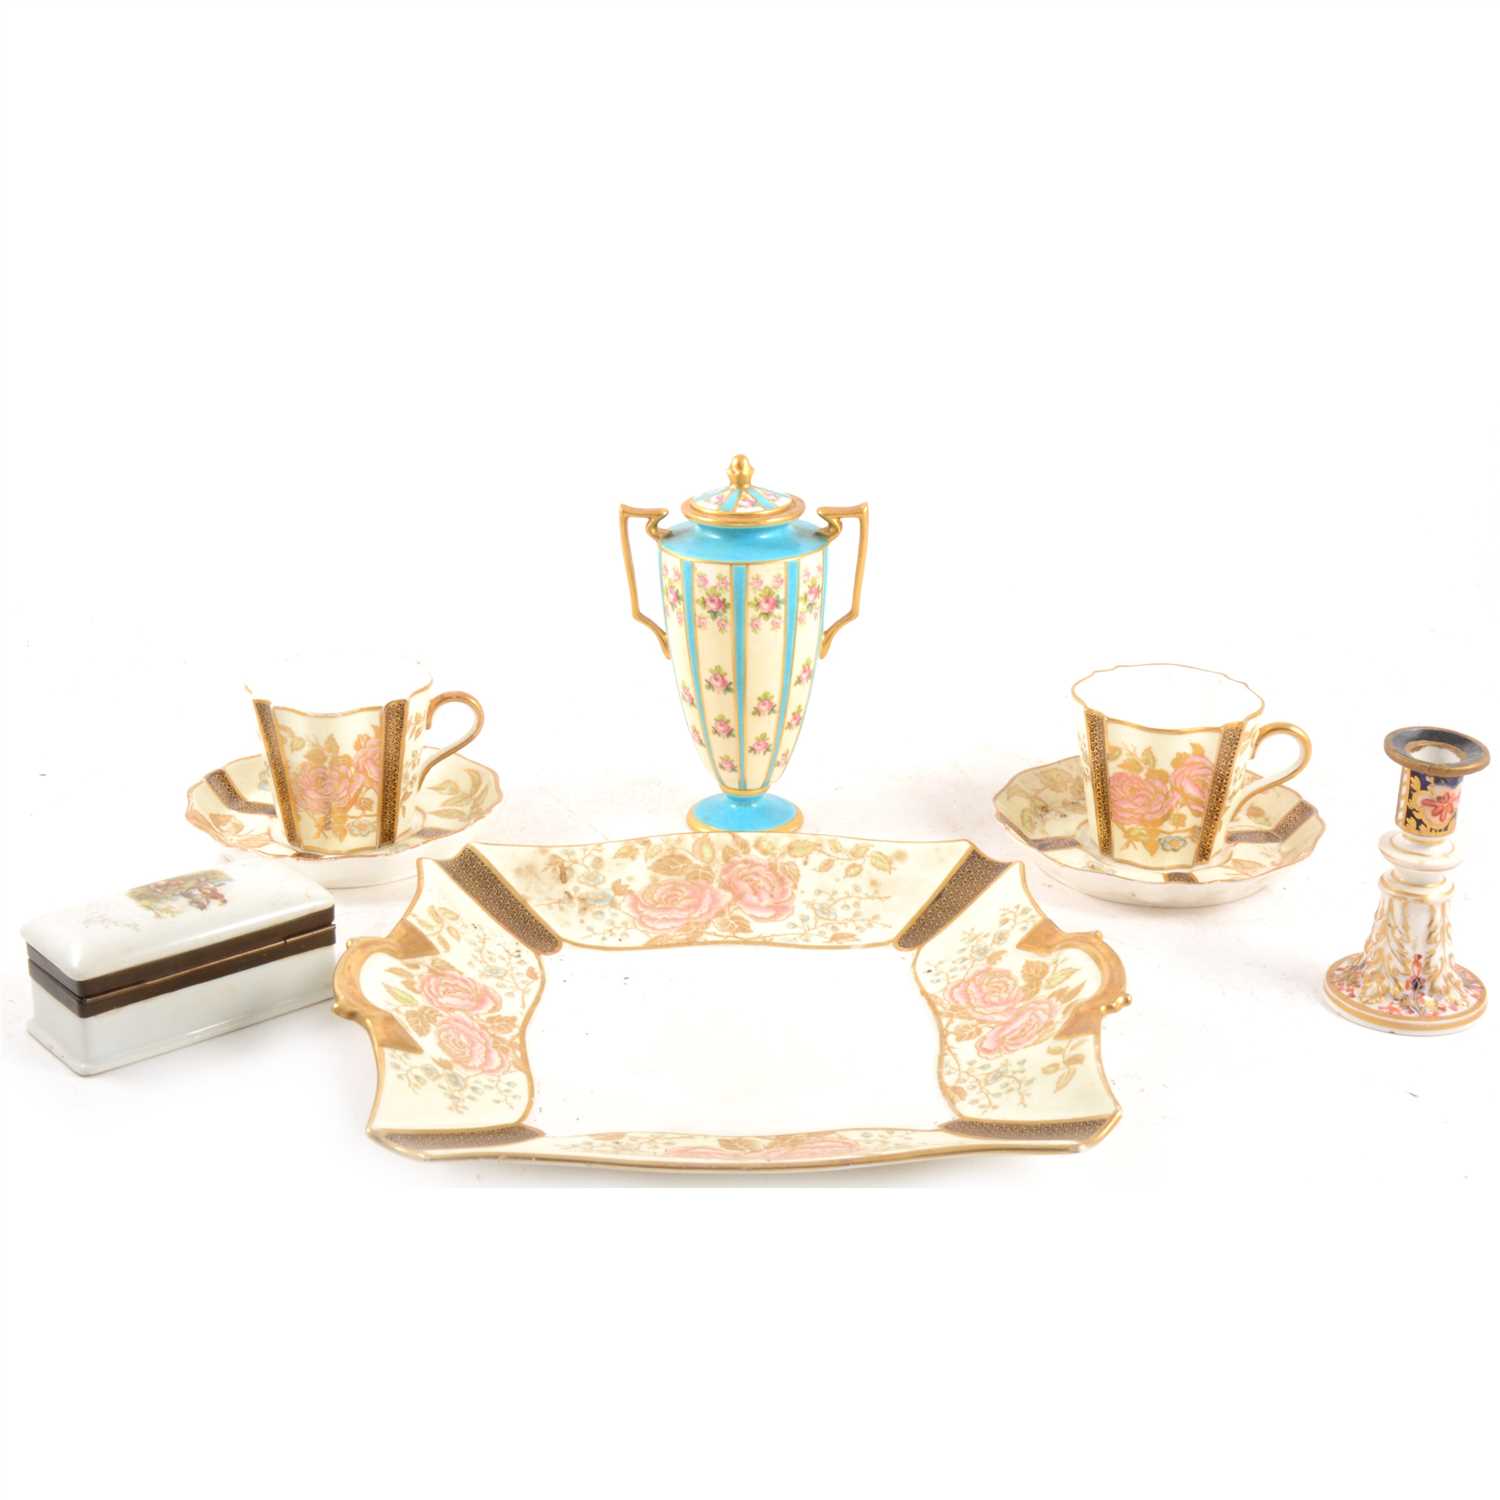 Lot 95 - Wedgwood part tea service, pair of Crown Derby covered vases, Crown Derby candle-stand, etc